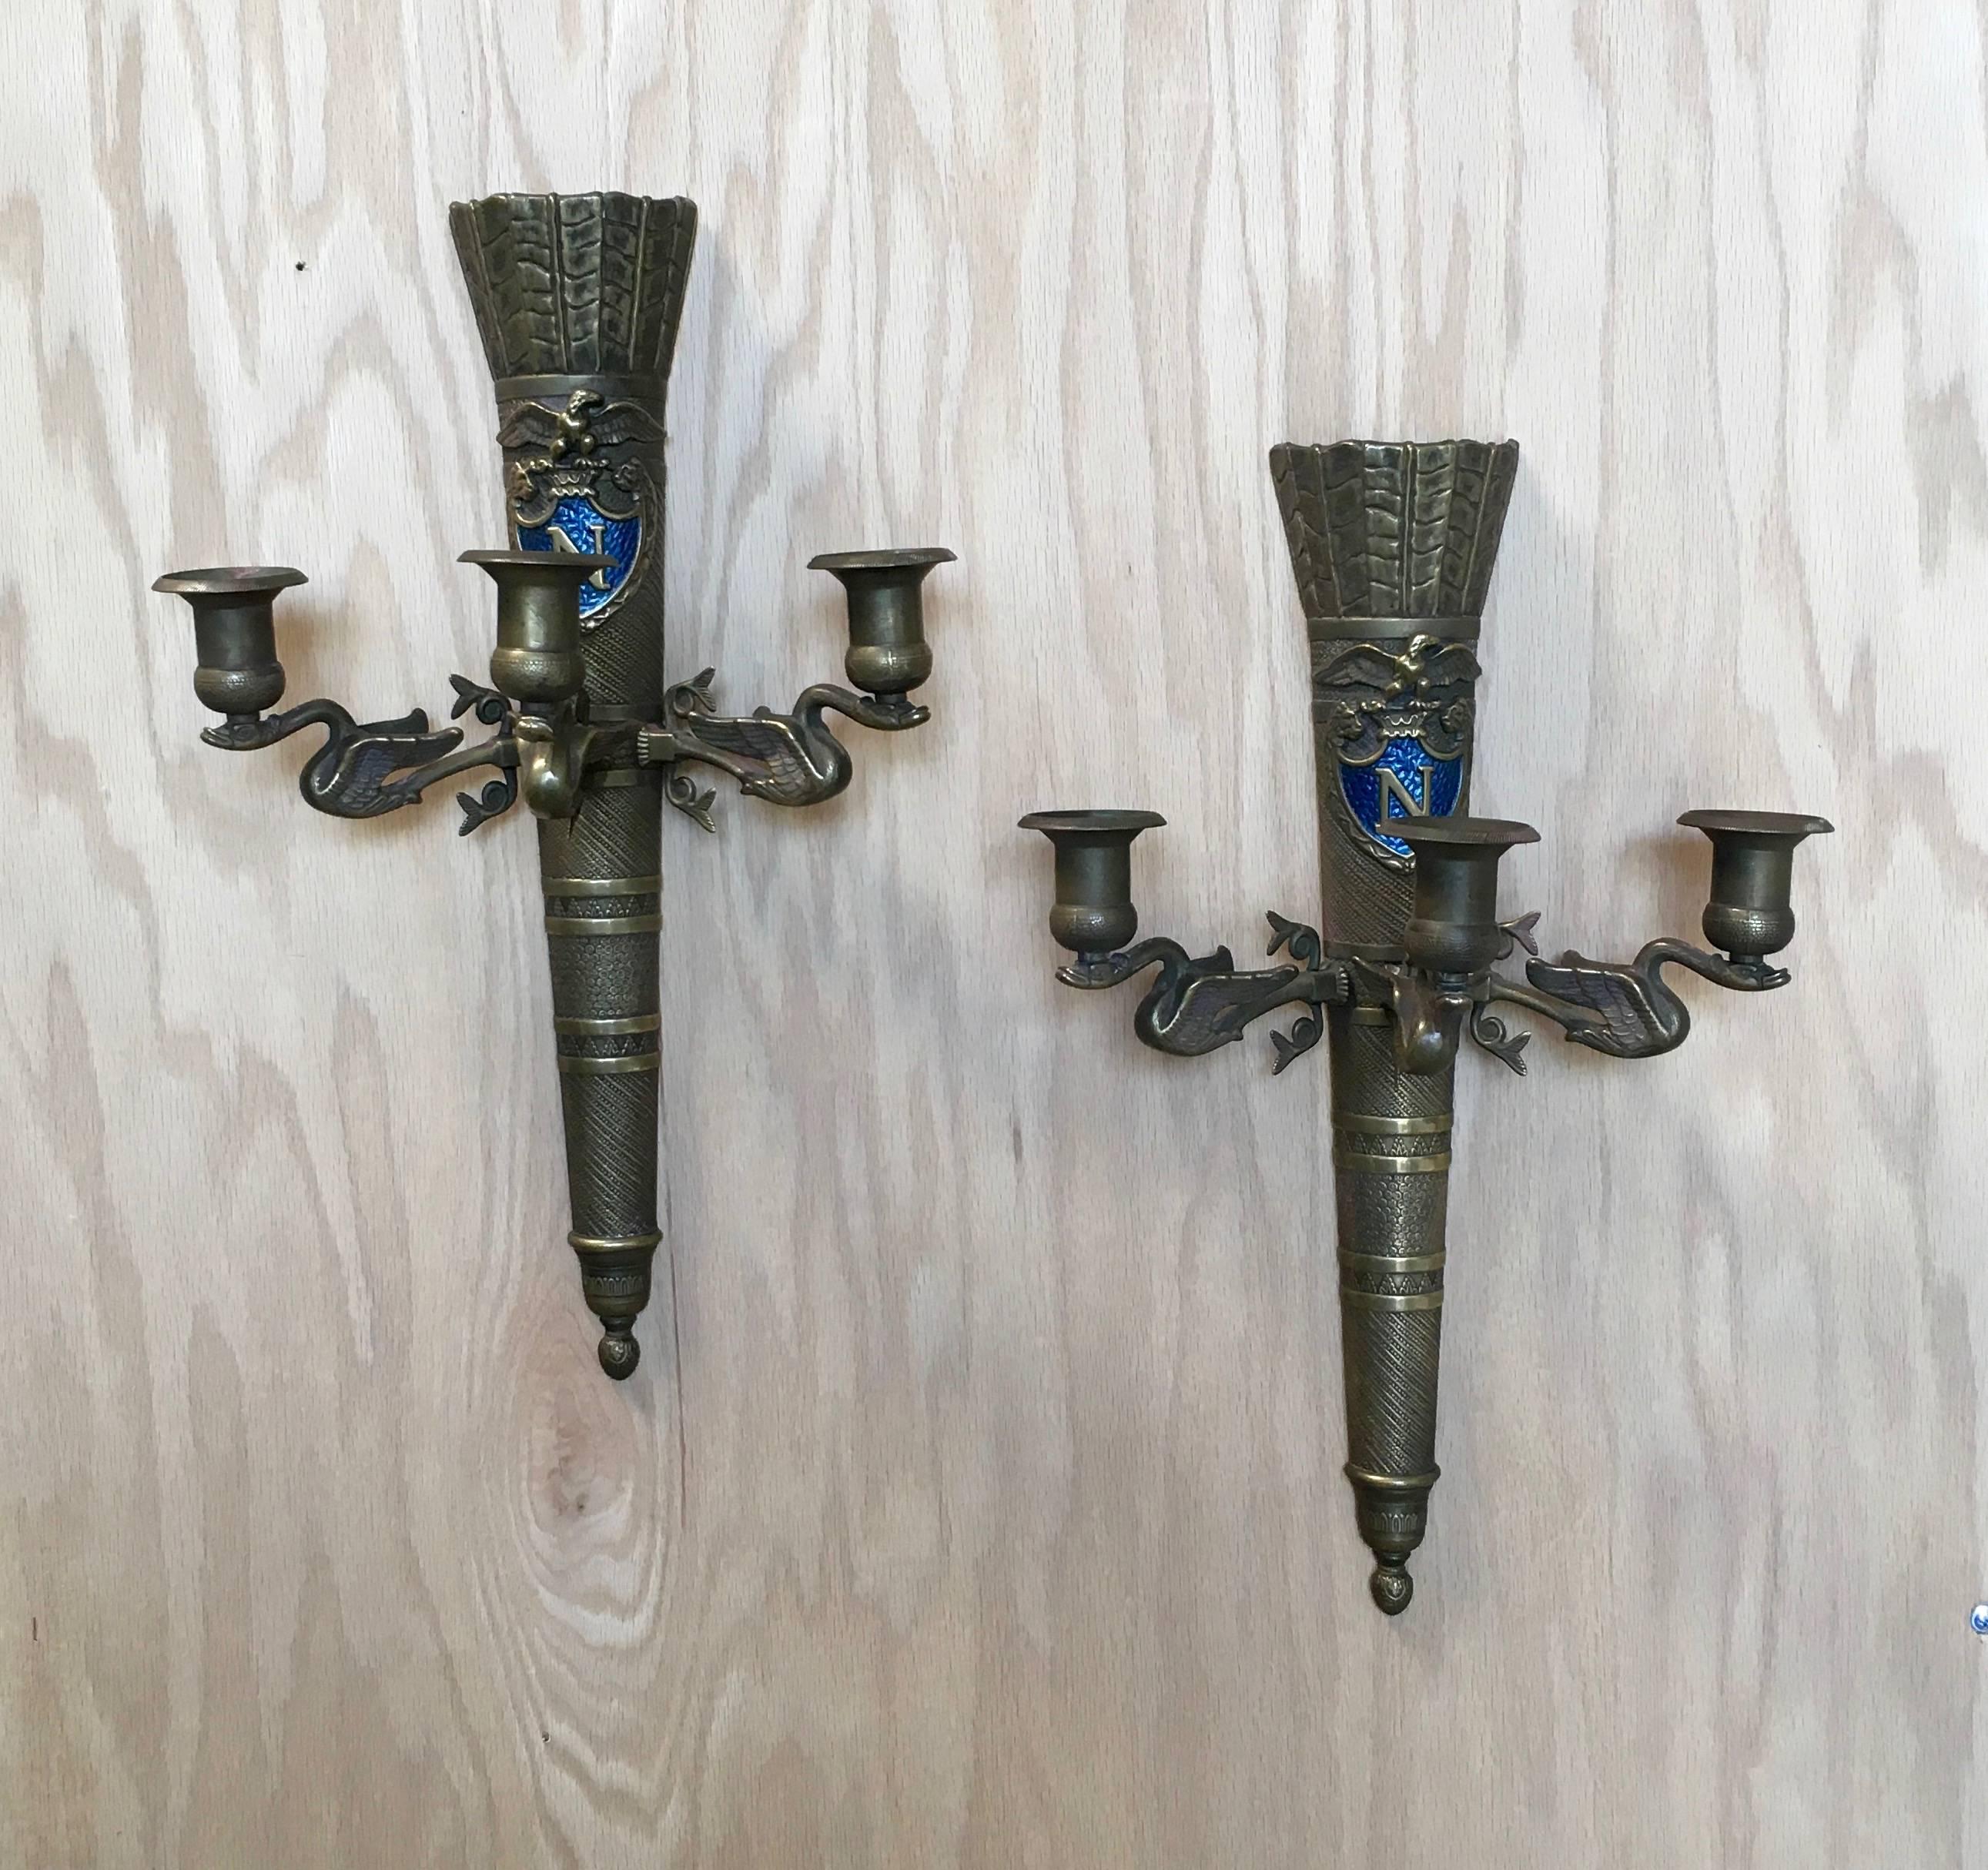 Pair of brass antique neoclassical Revival sconces with the royal blue Napoleon symbol.